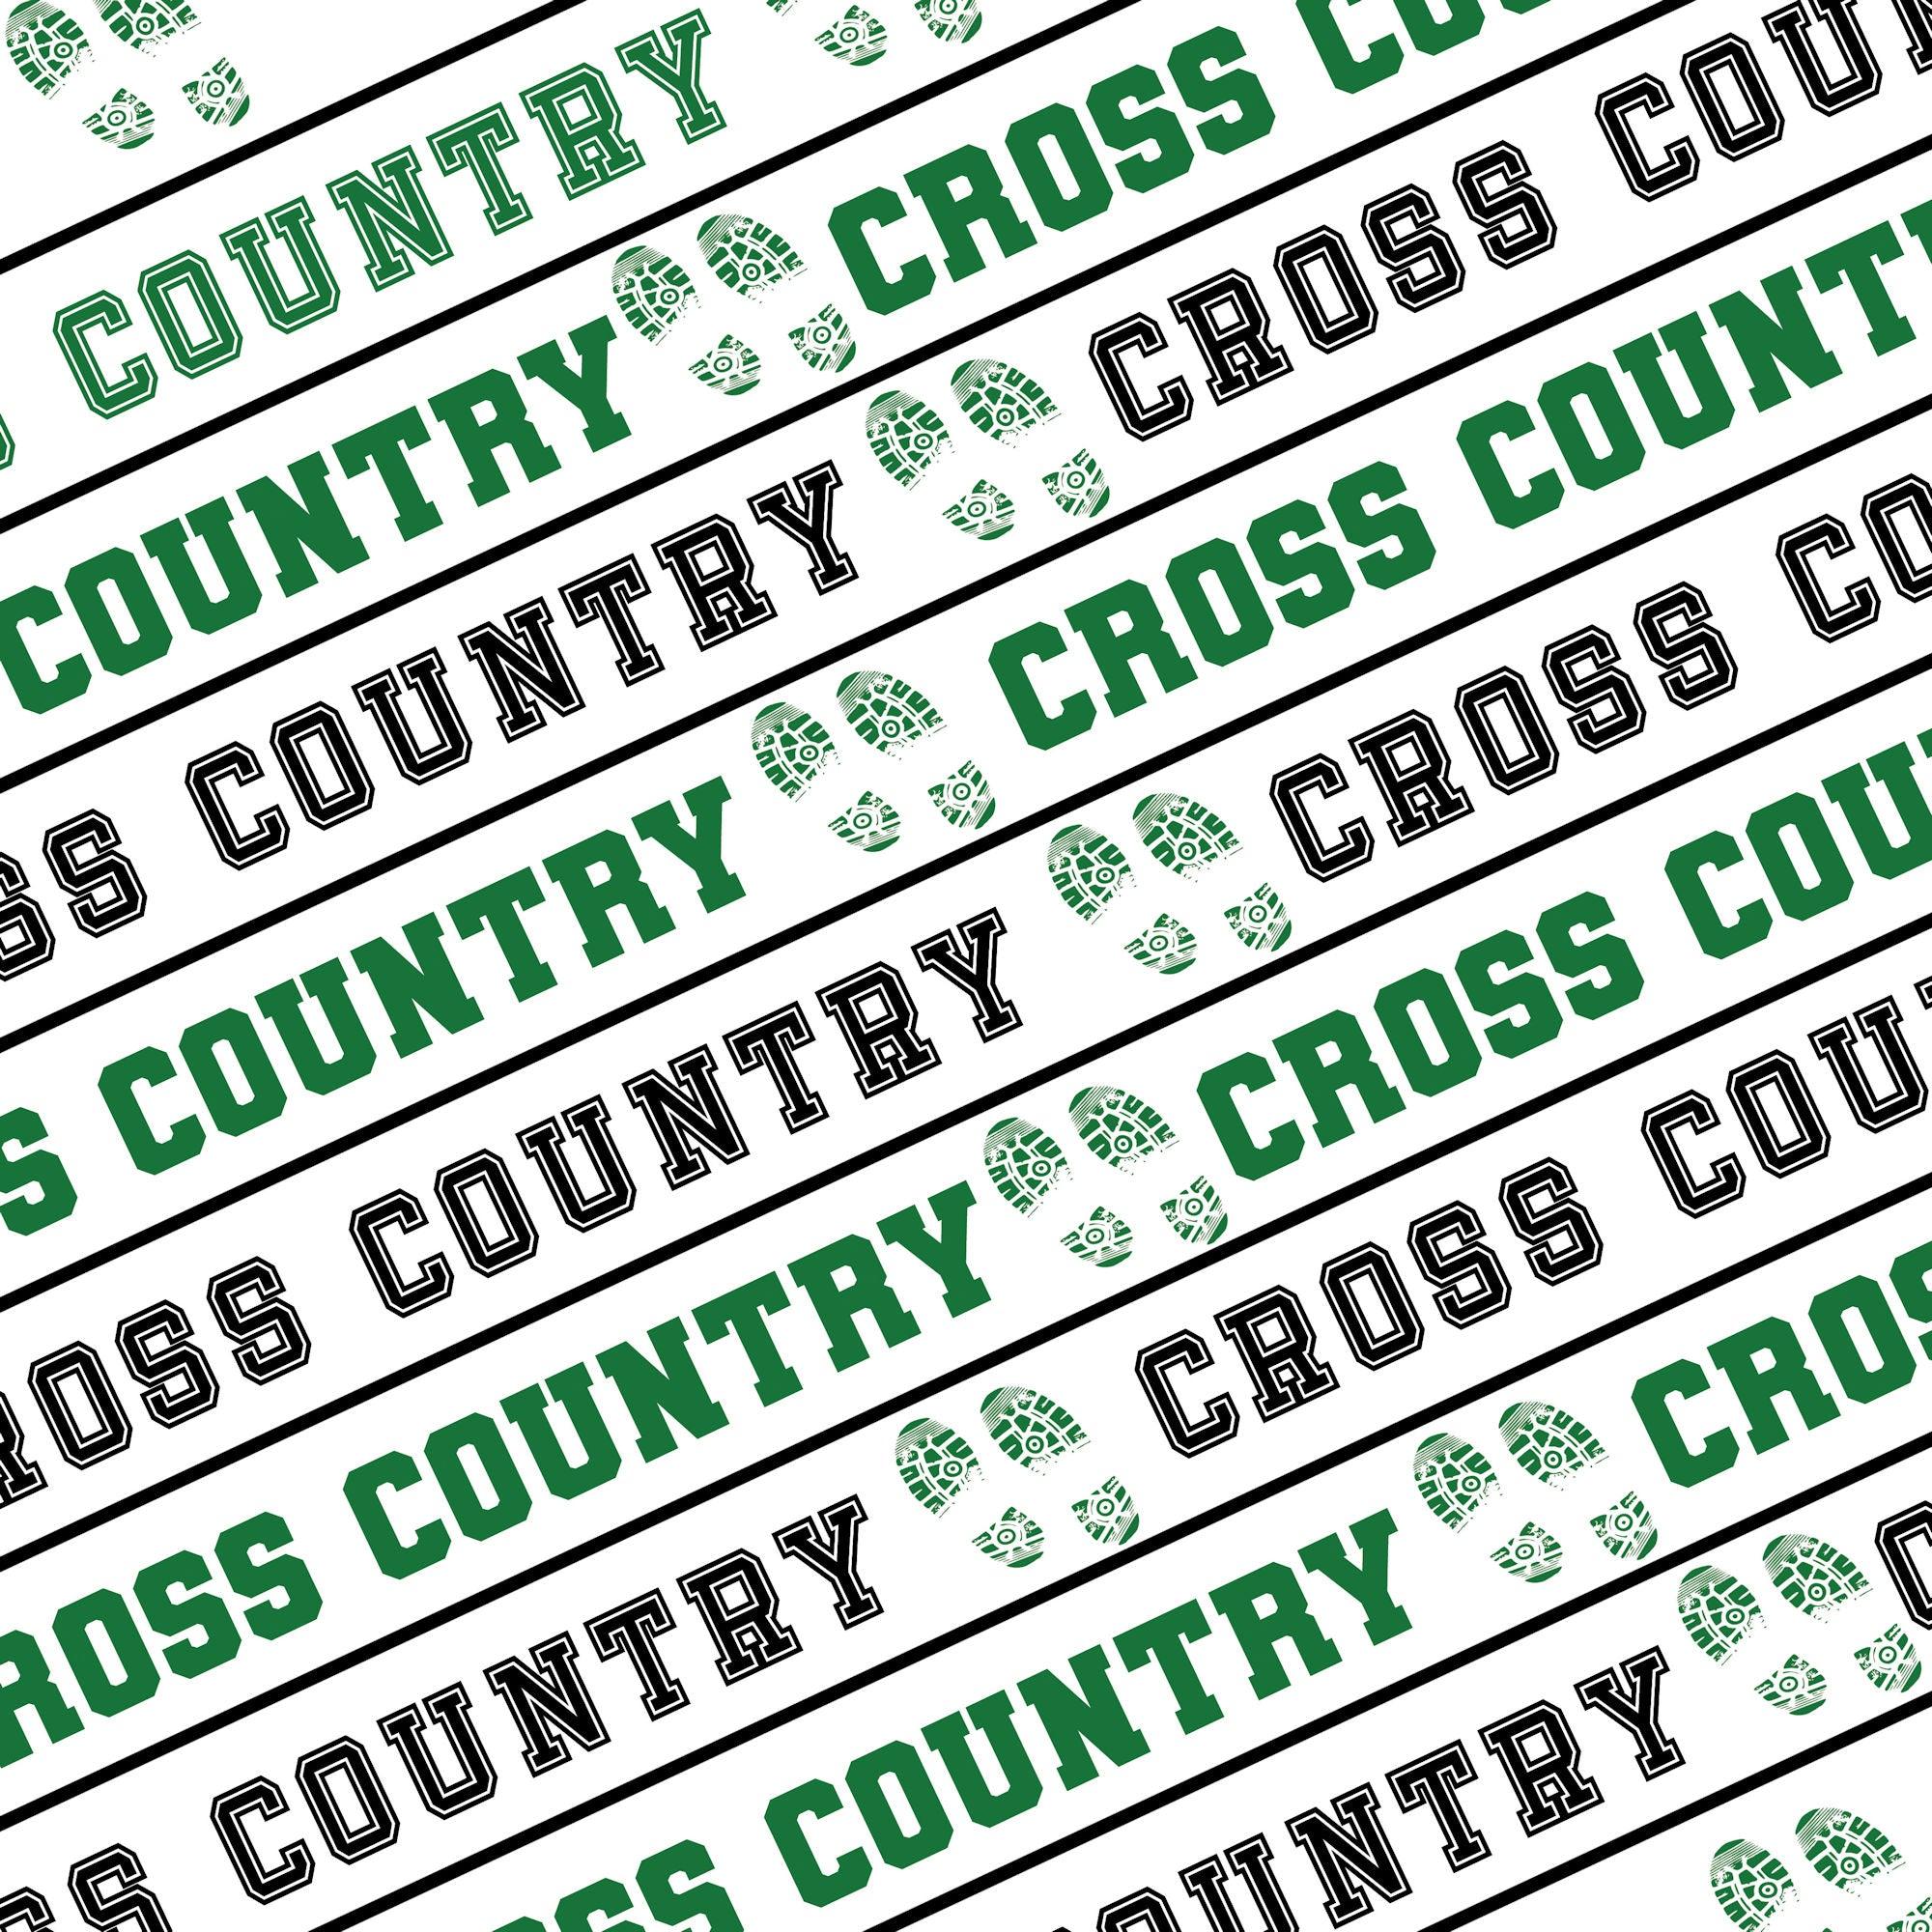 Cross Country Collection Collage 12 x 12 Double-Sided Scrapbook Paper by SSC Designs - Scrapbook Supply Companies